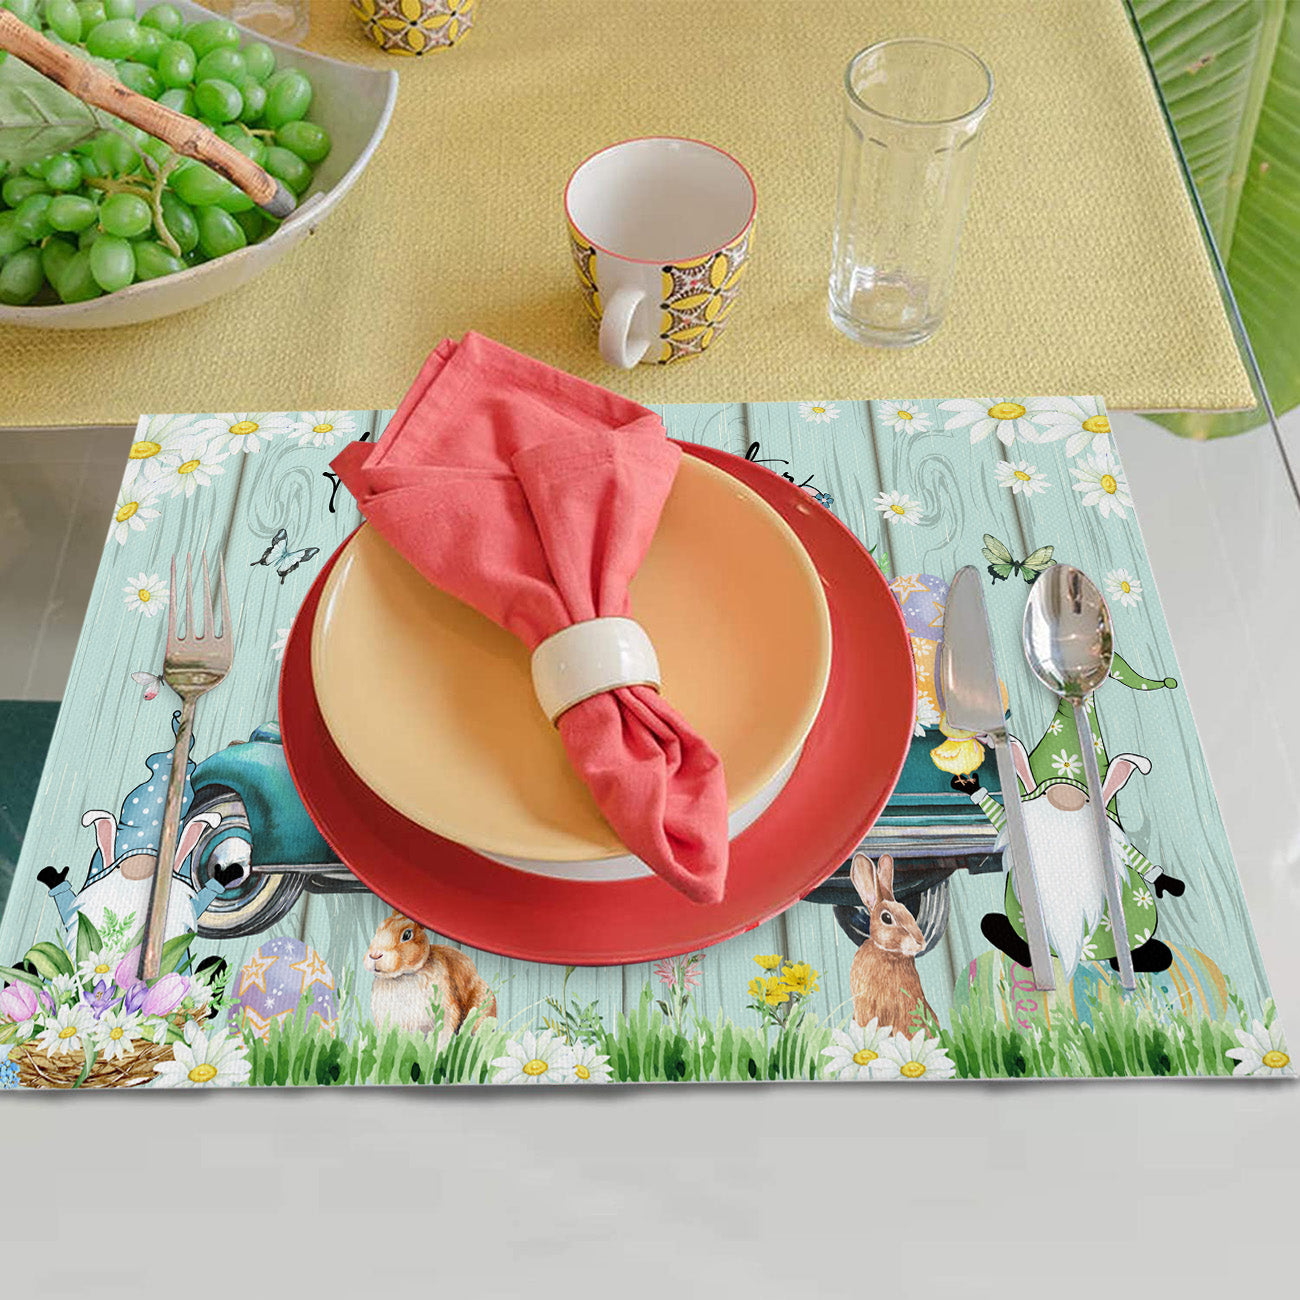 Gnome With Truck - Easter Themed Placemat